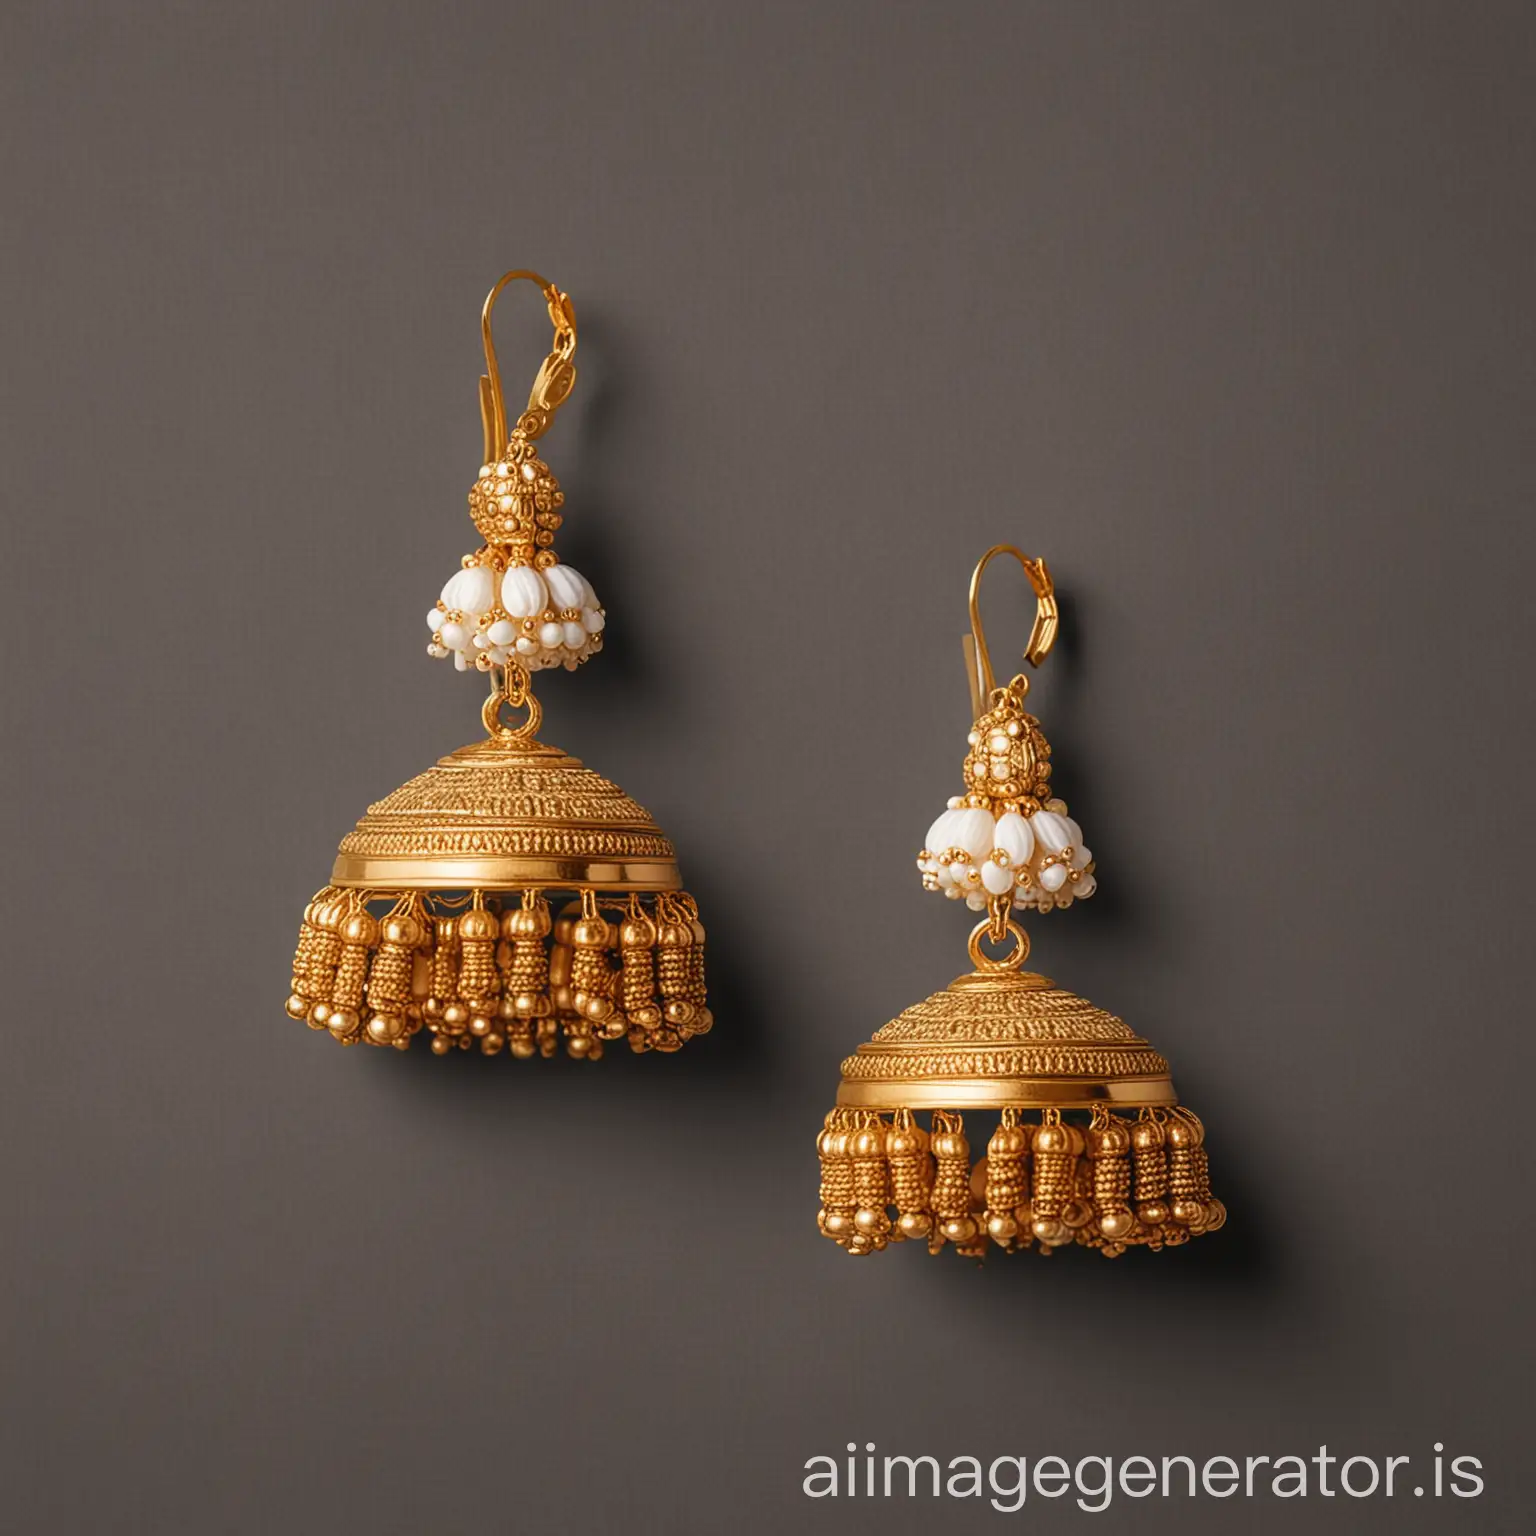 Realistic Indian modern jimmiki earrings in a plain background